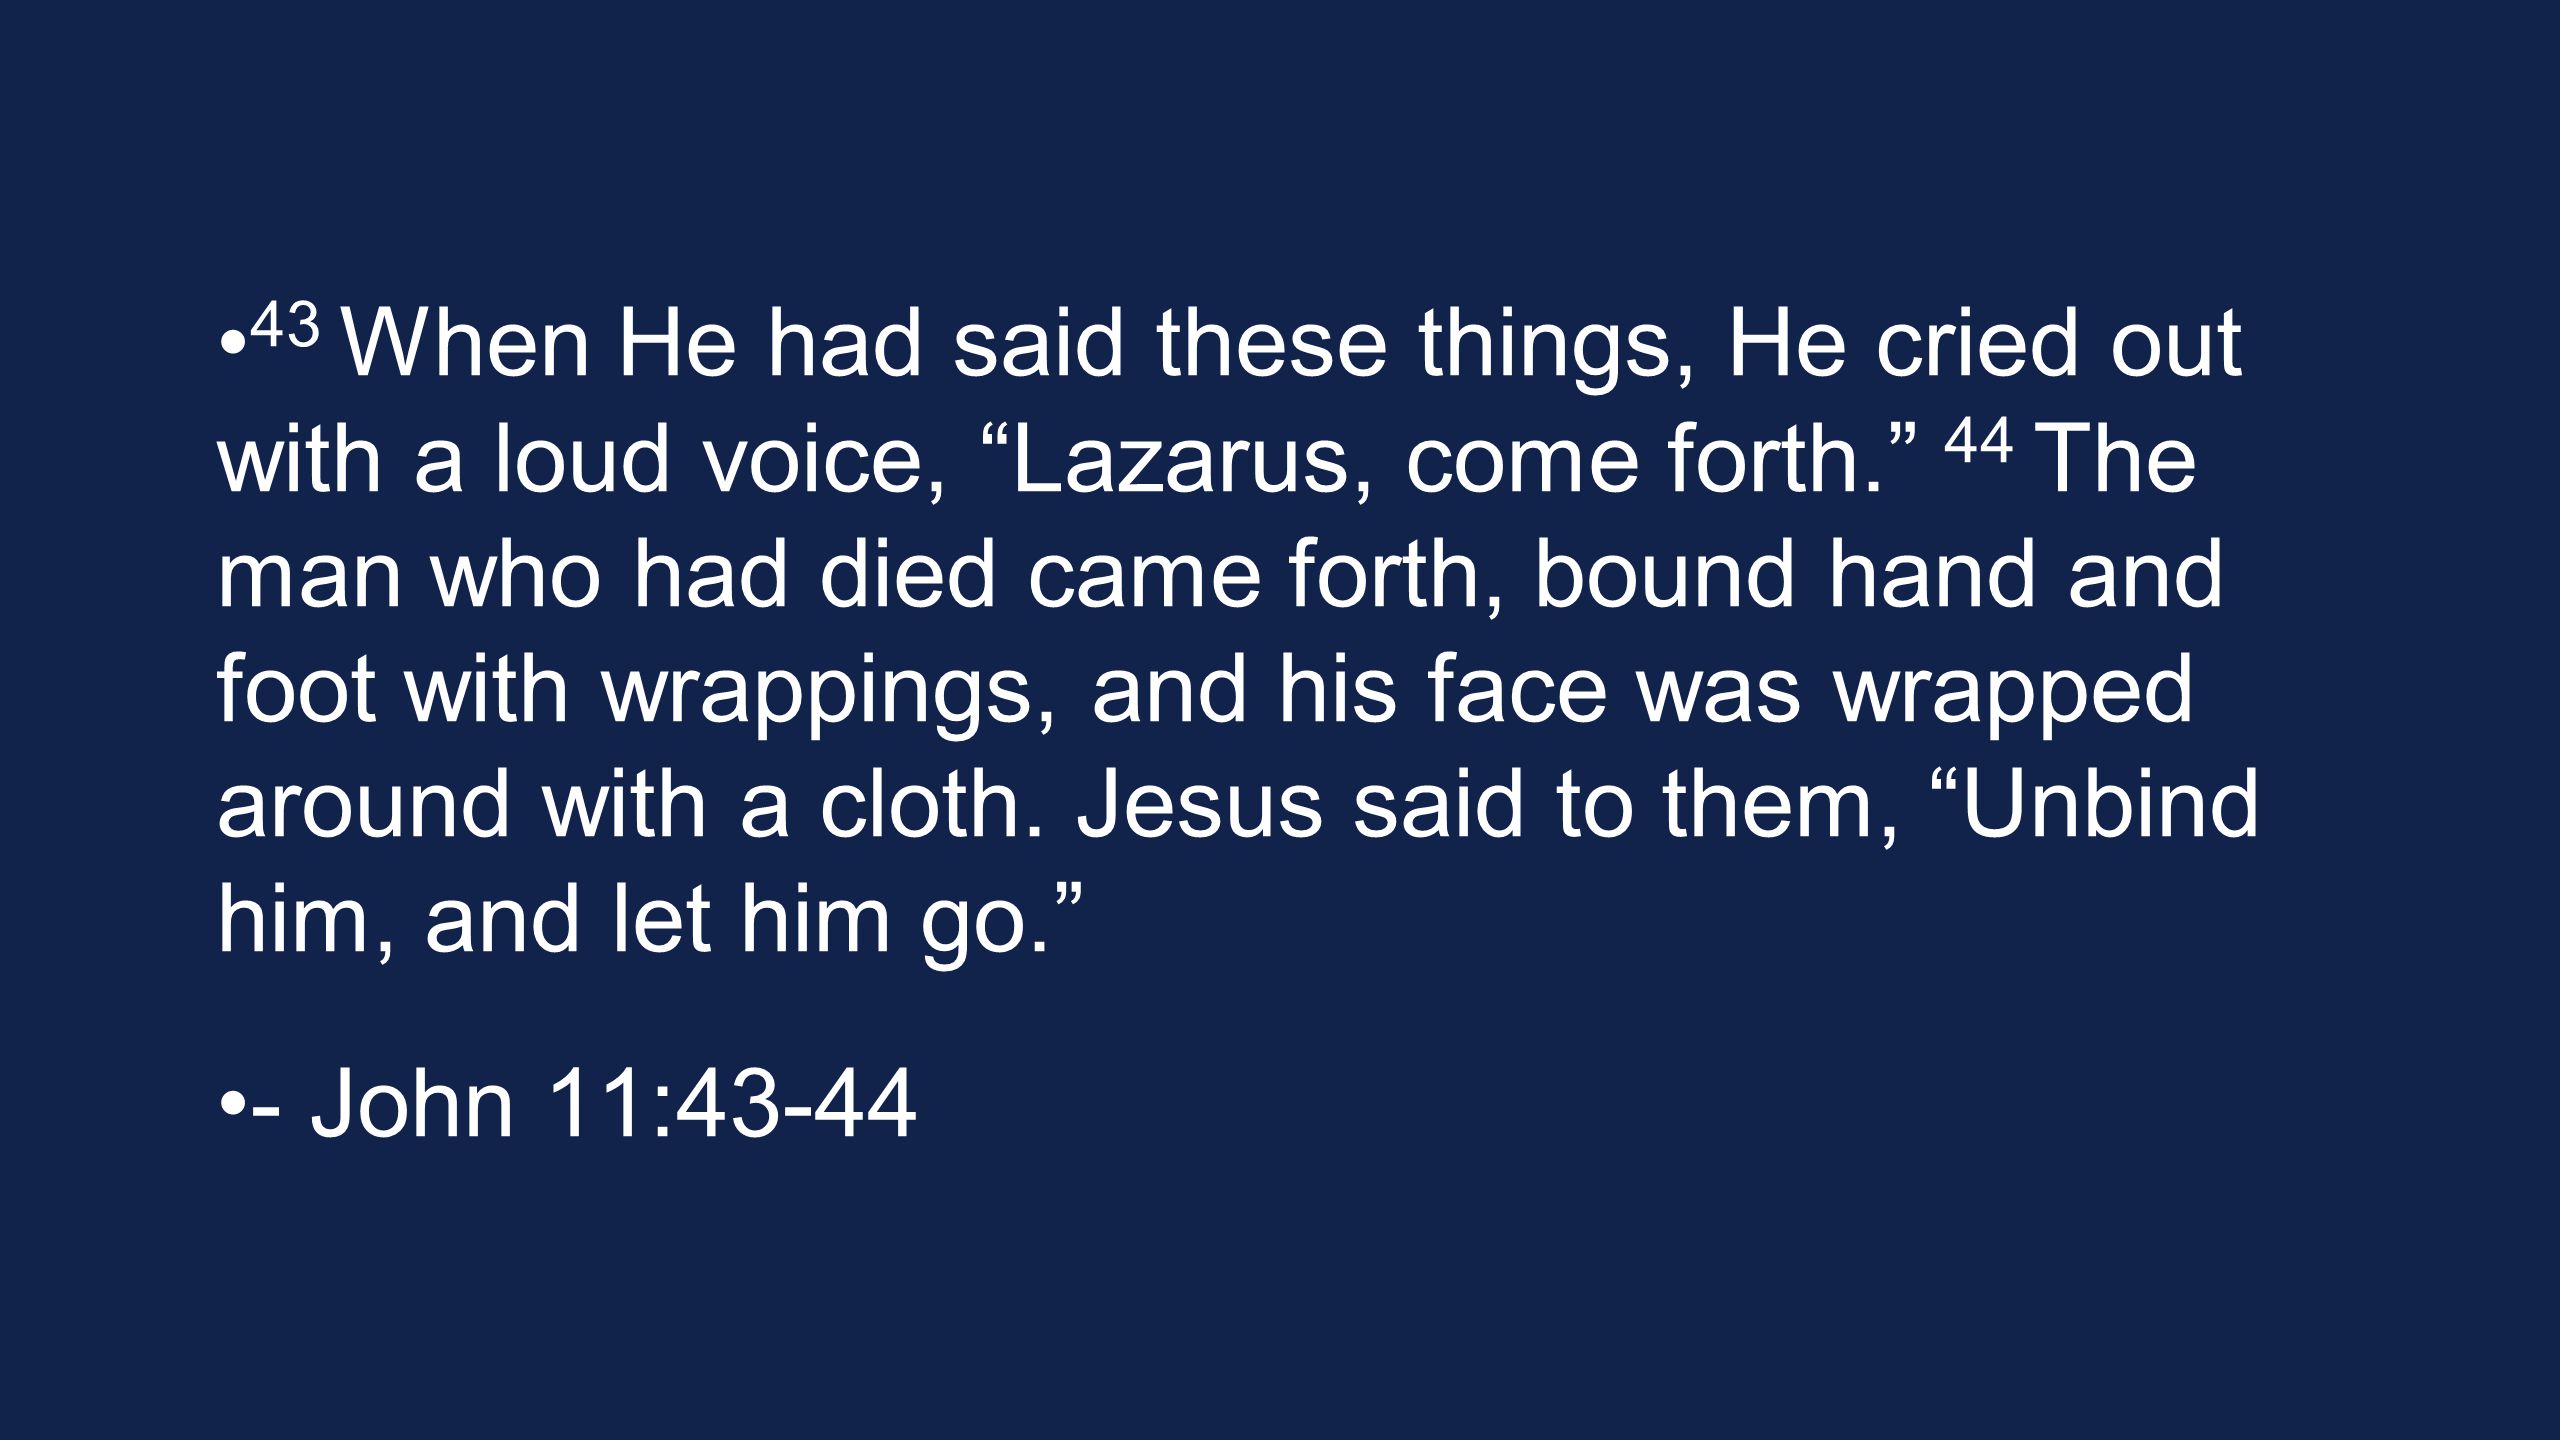 43 When He had said these things, He cried out with a loud voice, Lazarus, come forth. 44 The man who had died came forth, bound hand and foot with wrappings, and his face was wrapped around with a cloth.